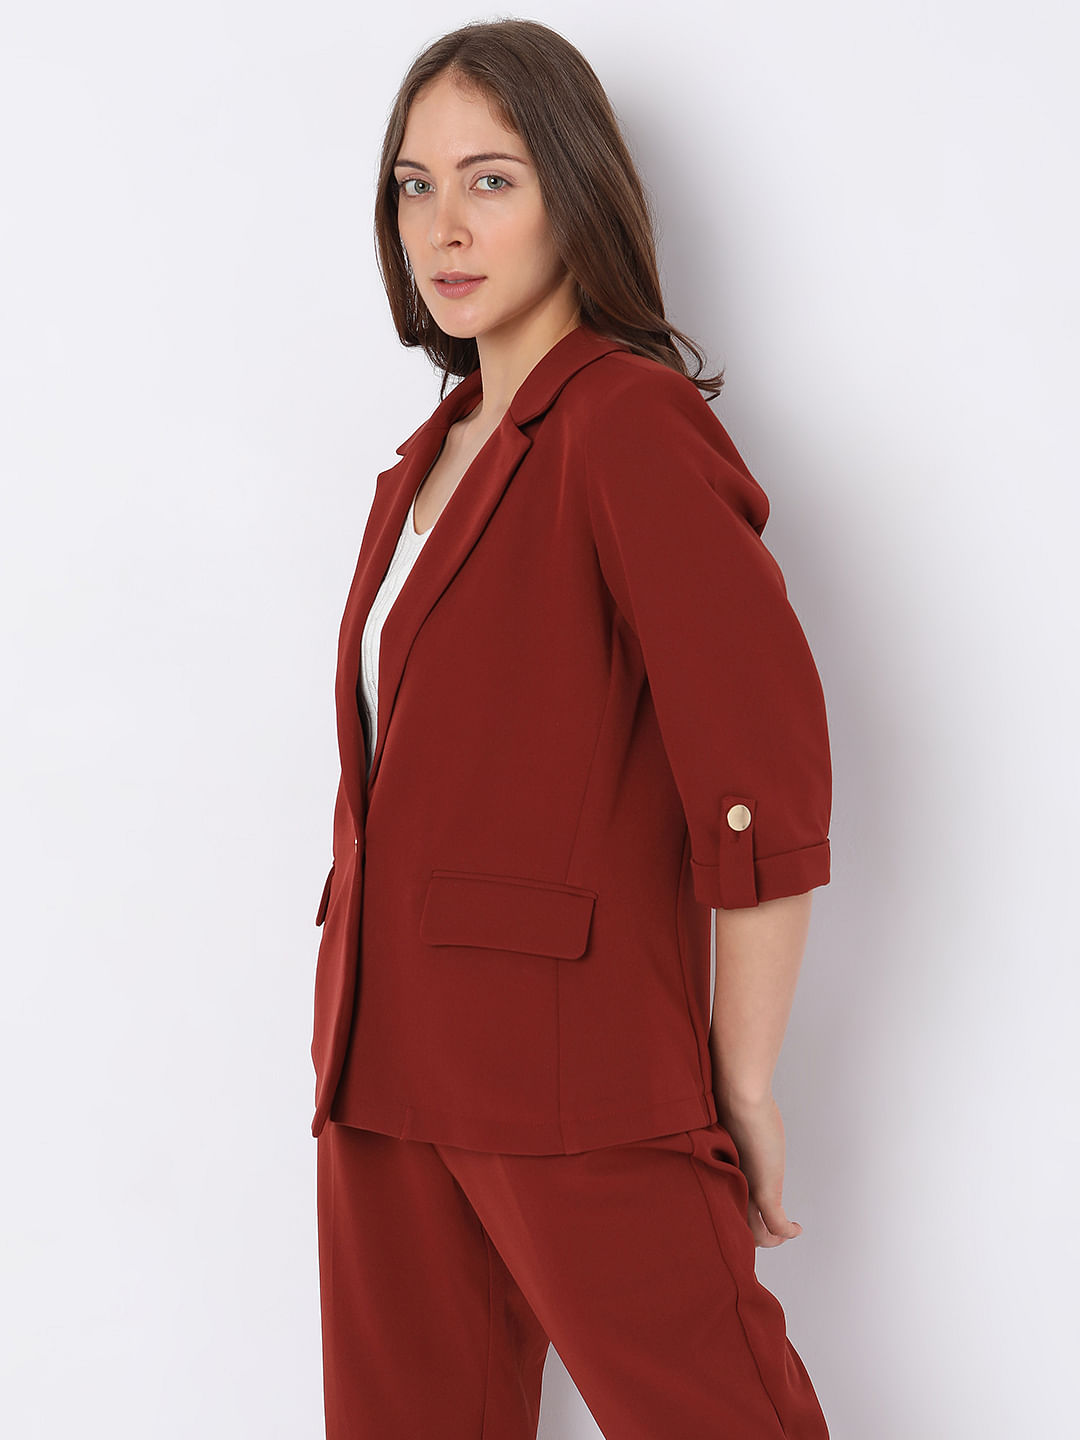 Unique21 Petite 3 piece blazer, shorts and pants set in red | ASOS